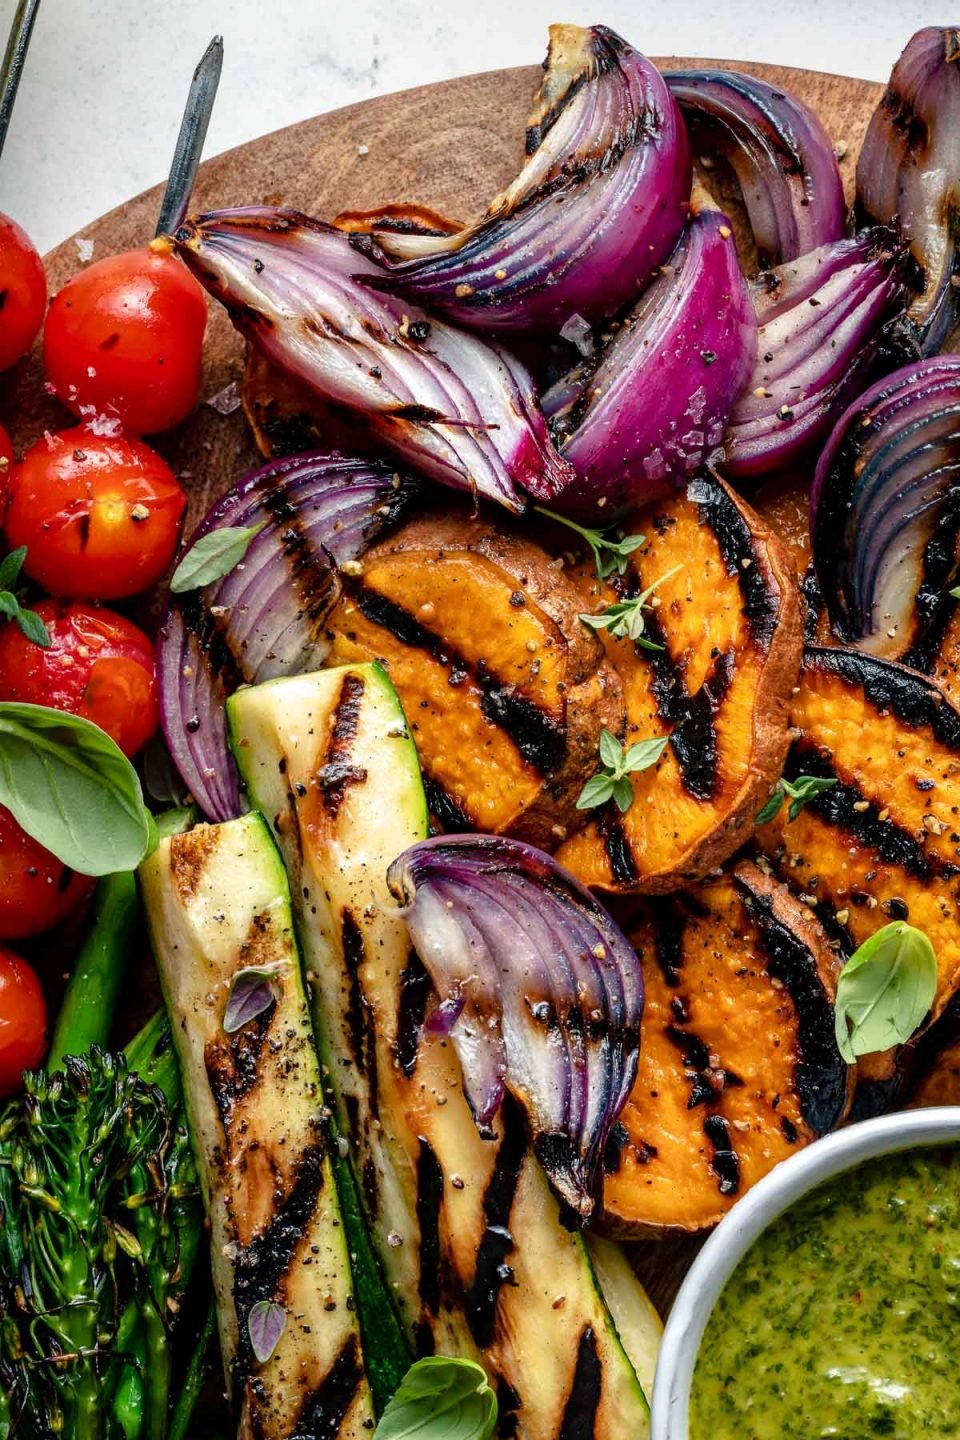 A close up for grilled veggies arranged on top of a round wooden cutting board. The close up includes grilled onion, grilled sweet potatoes, grilled tomato skewers, grilled zucchini, & grilled broccolini garnished with fresh herbs. The veggies are arranged around a small white bowl of chimichurri sauce for dipping that also sits on top of the cutting board. The wooden cutting board sits on top of a blue & white marbled surface.